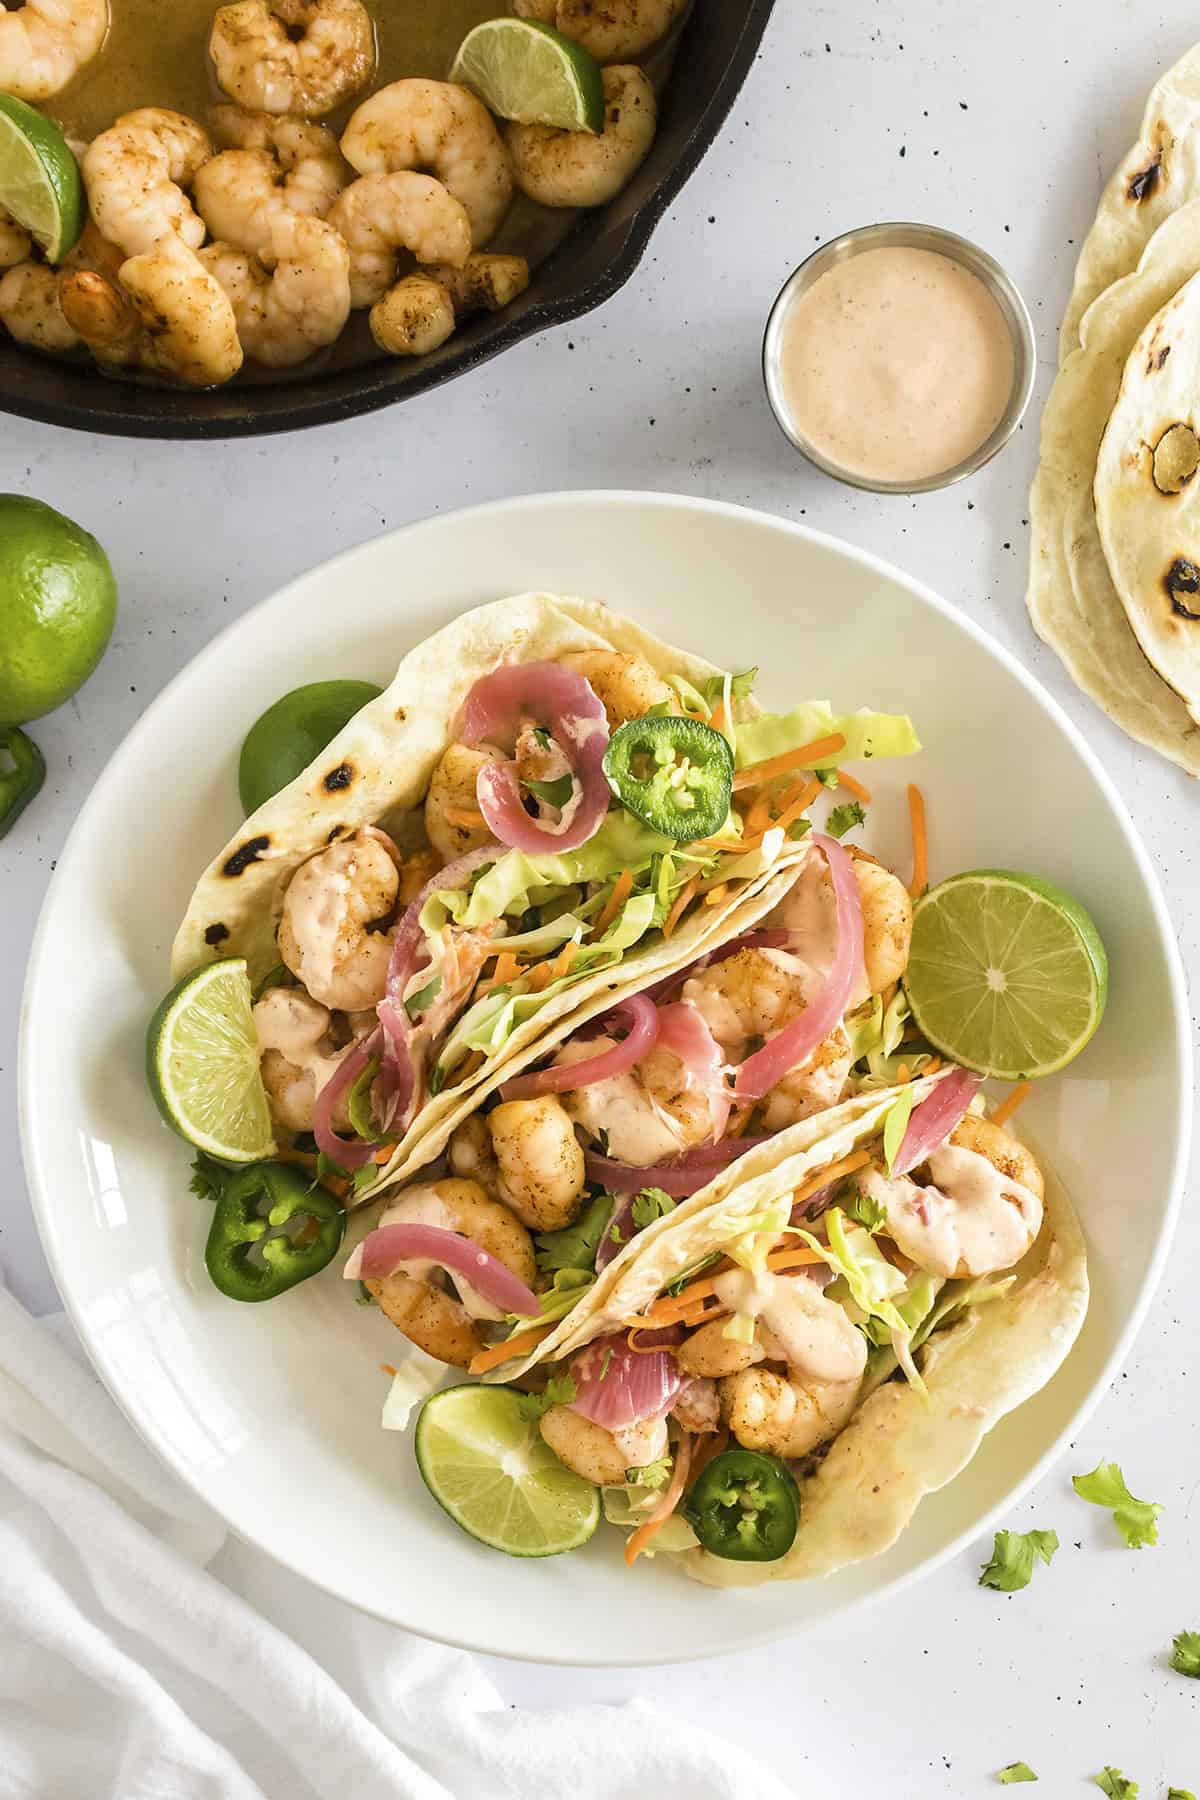 Overhead view of shrimp tacos on plate.